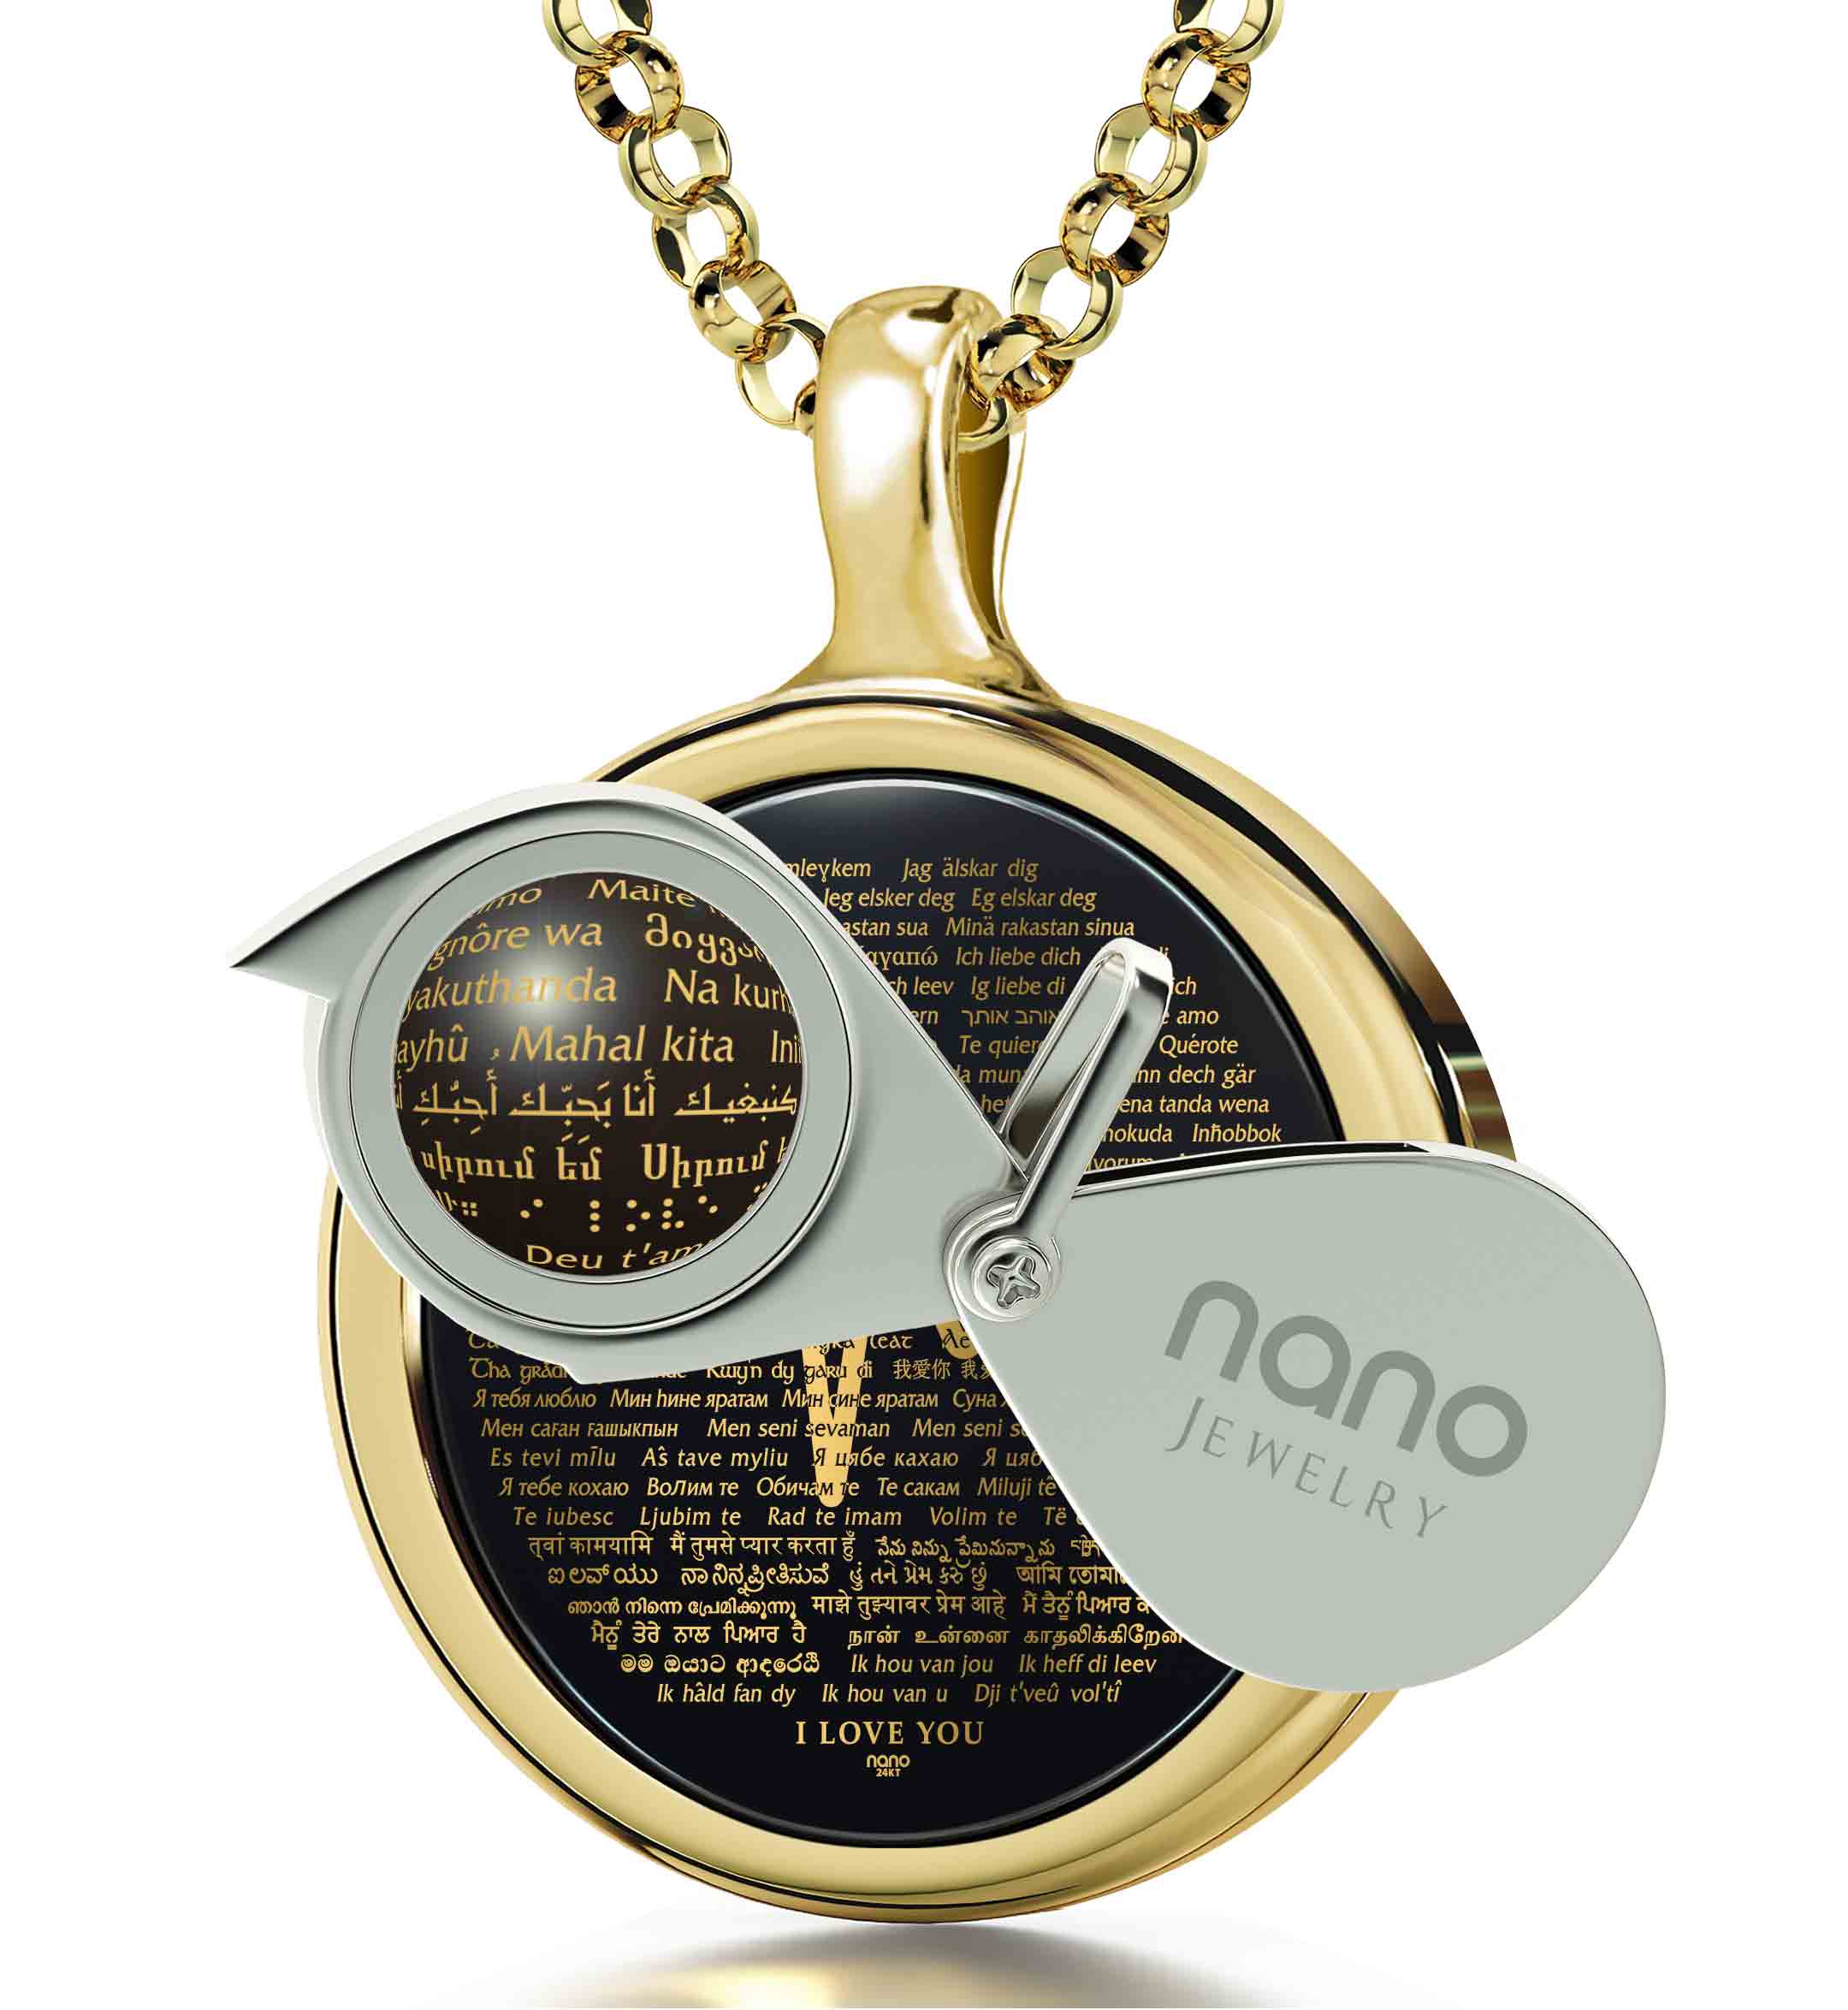 Onyx Round Pendant - 'I Love You' in 120 Languages